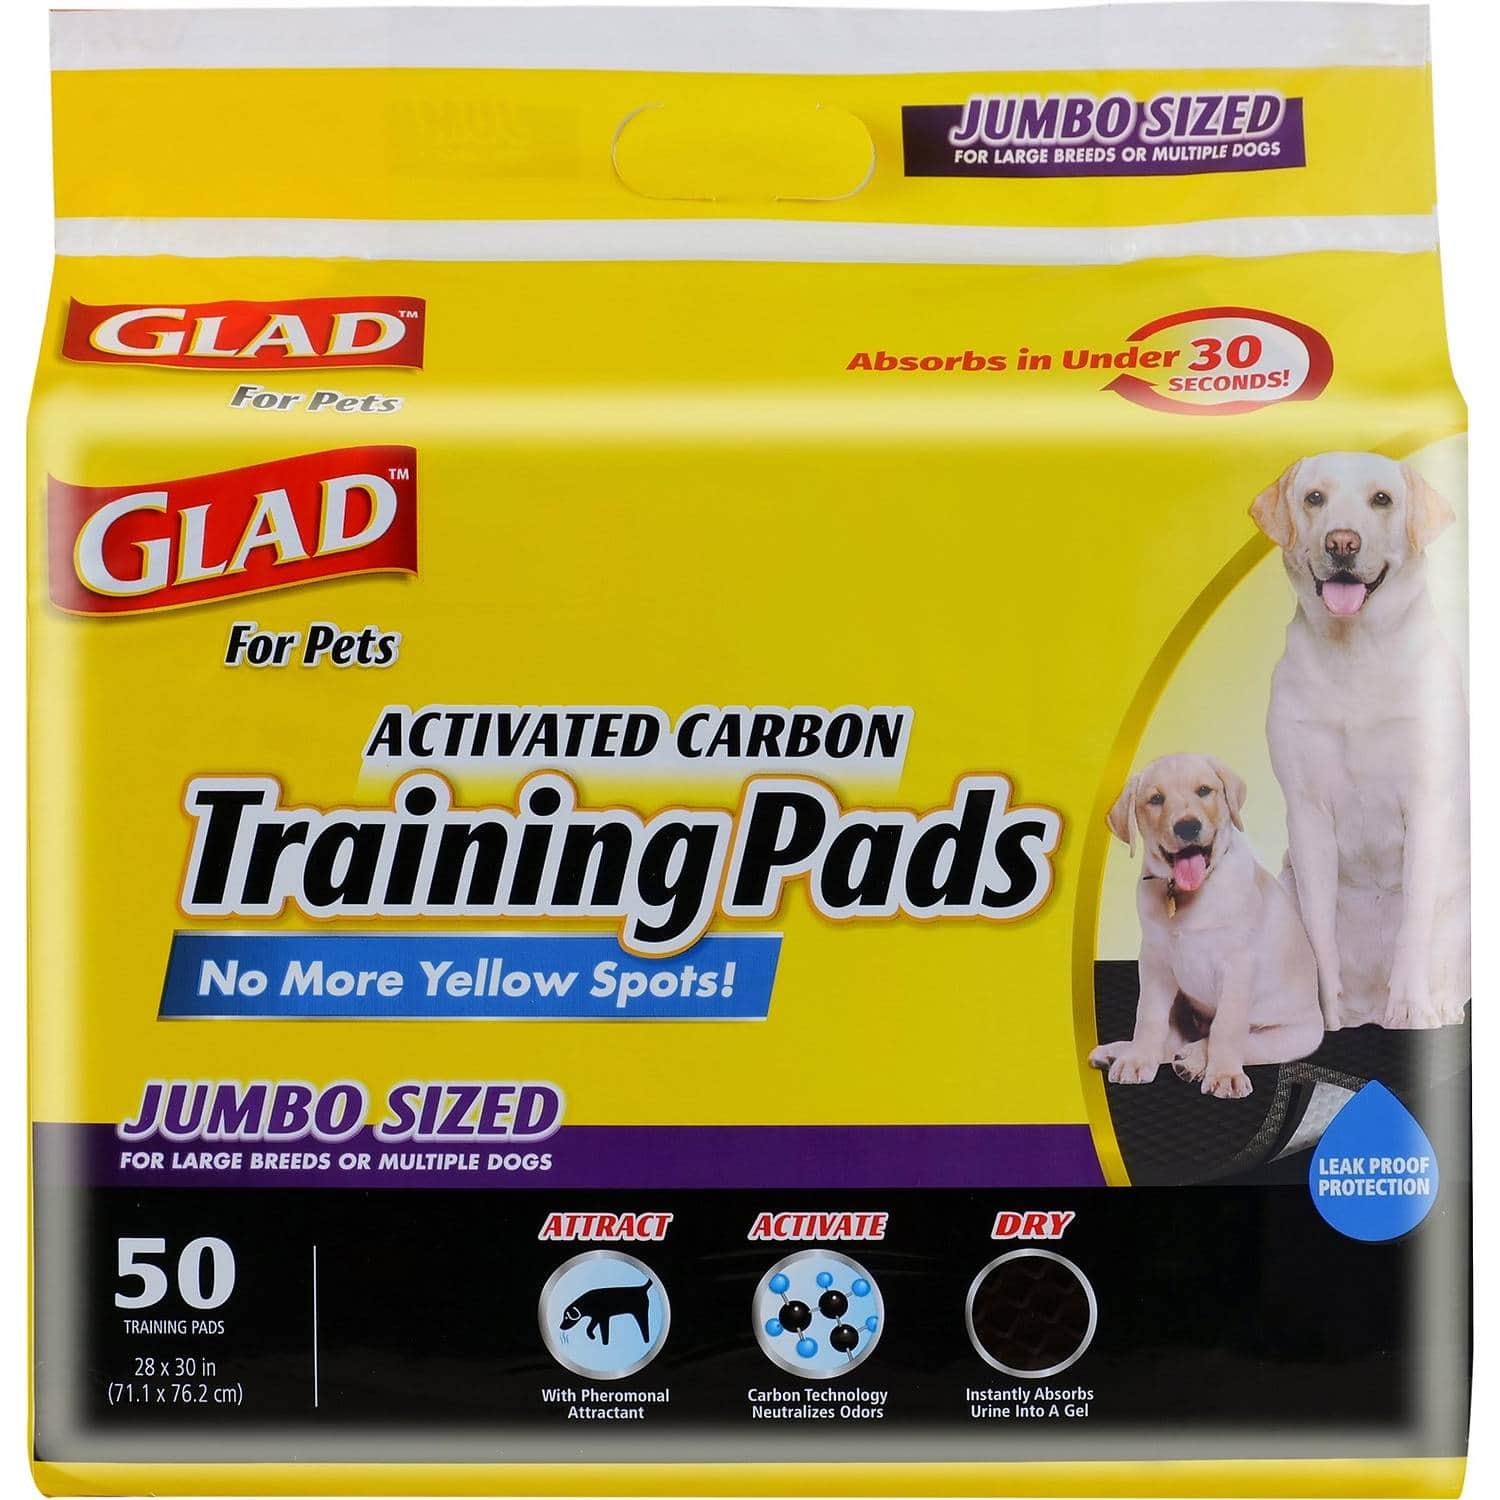 Glad Activated Carbon Puppy Pads (1)